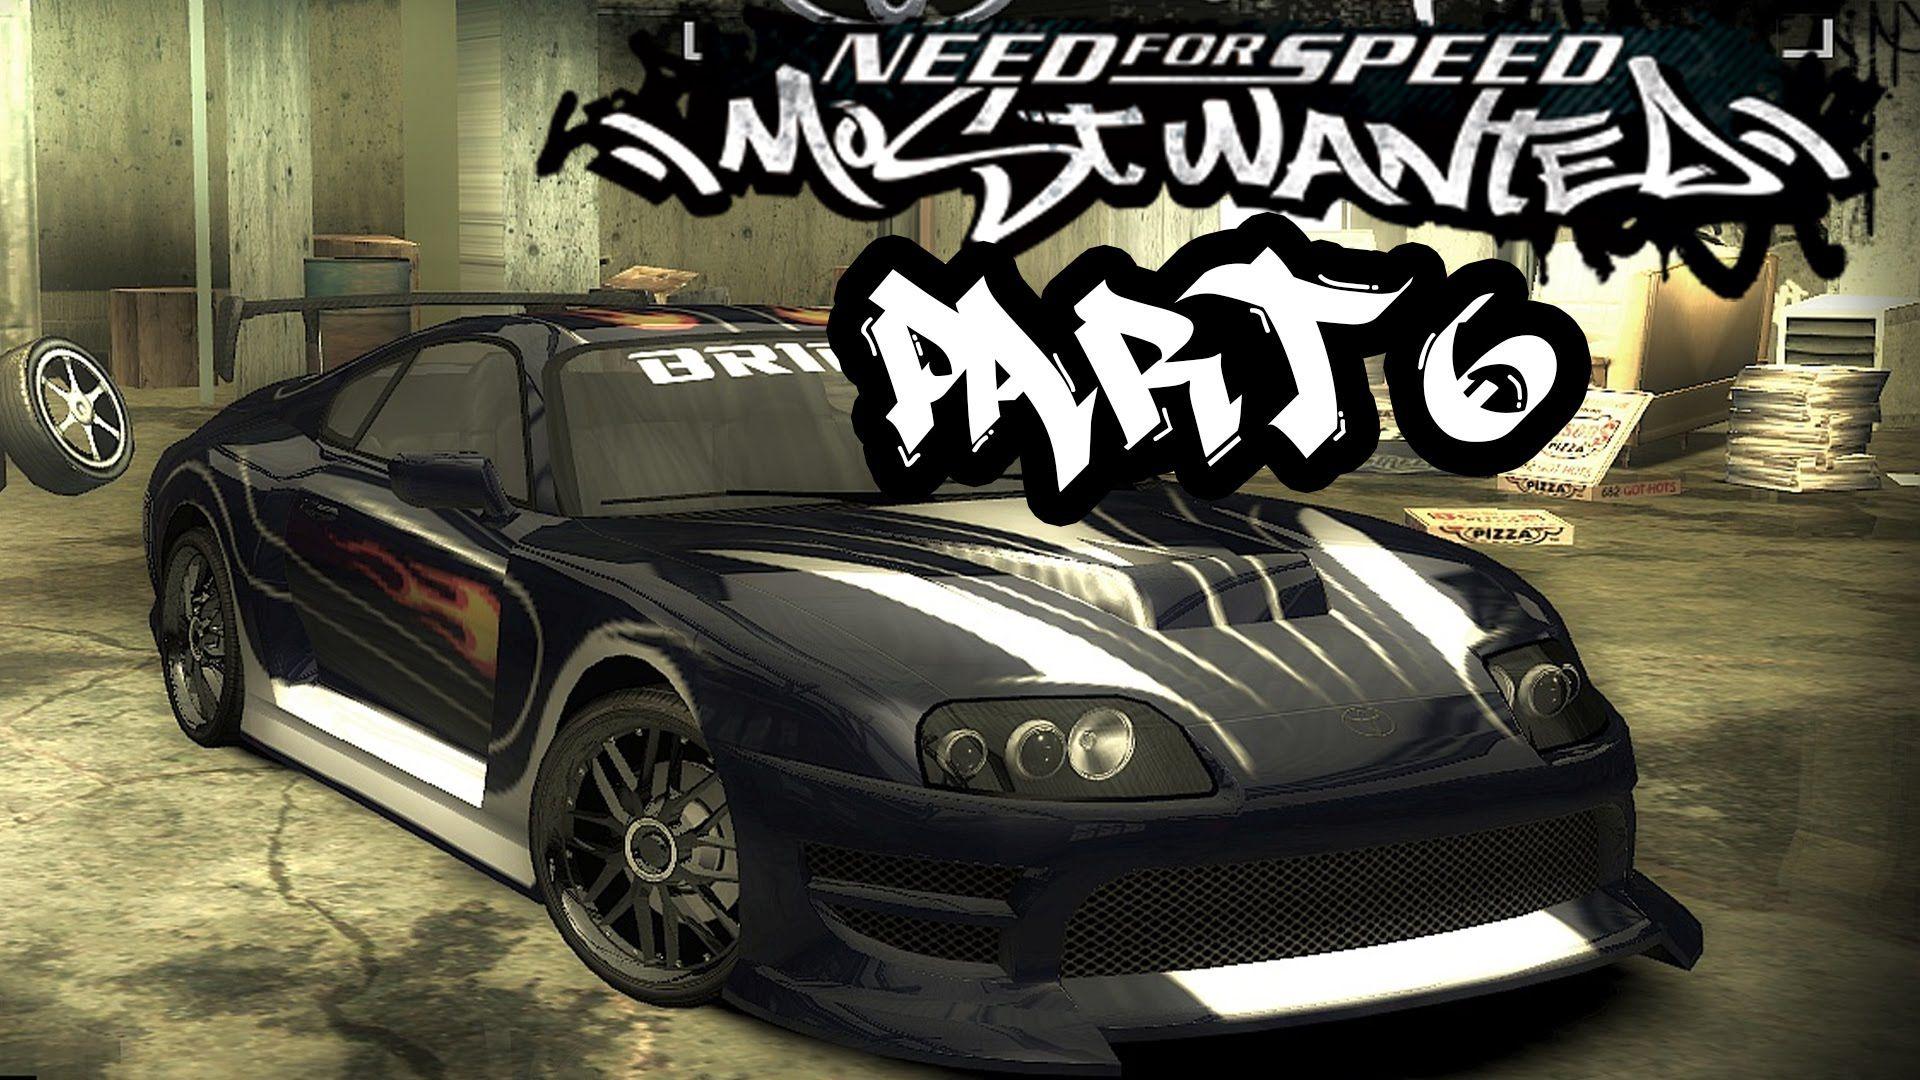 Need for Speed Most Wanted (2005) Gameplay Walkthrough Part 6